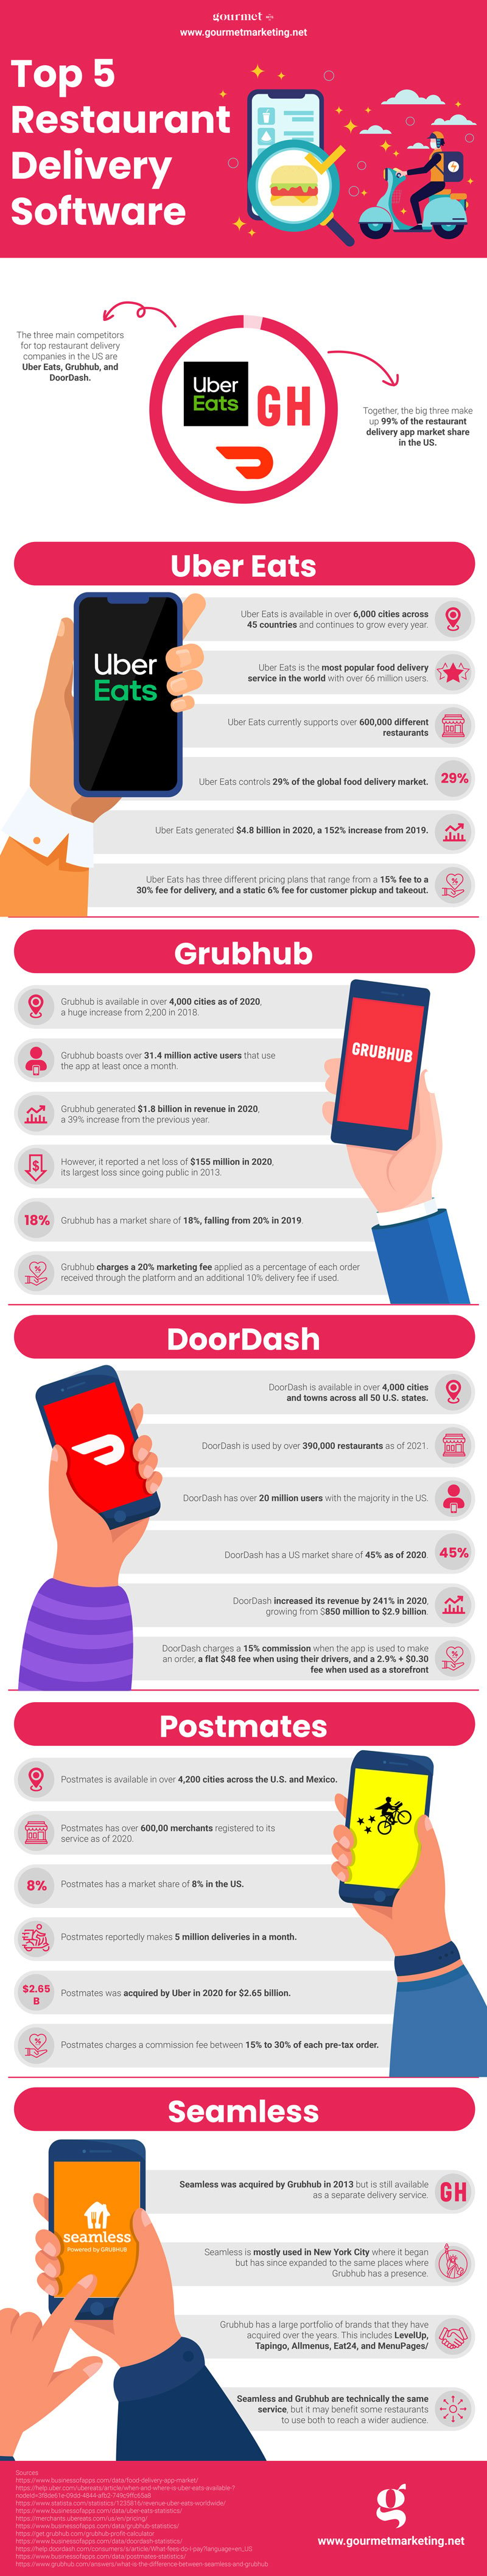 top-5-restaurant-delivery-software-infographic